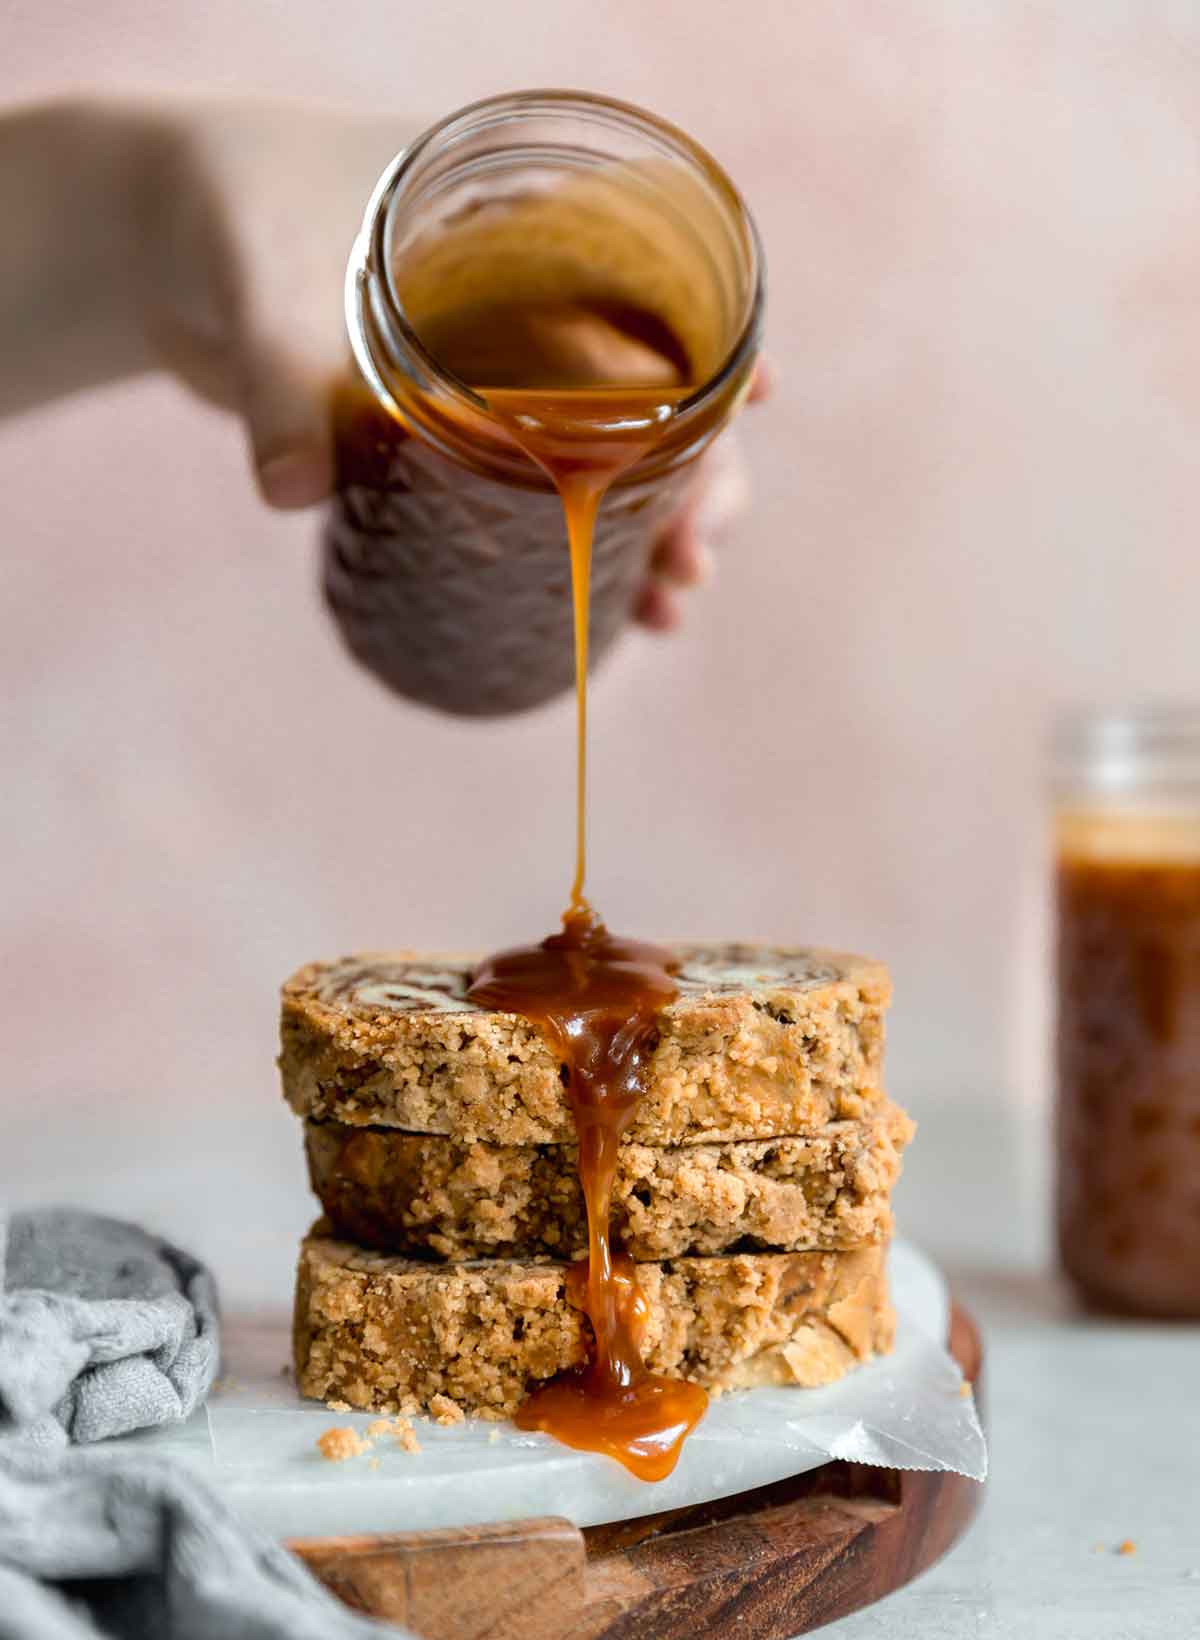 A jar of salted caramel sauce being drizzled on a stack of three slices of crumb cake.